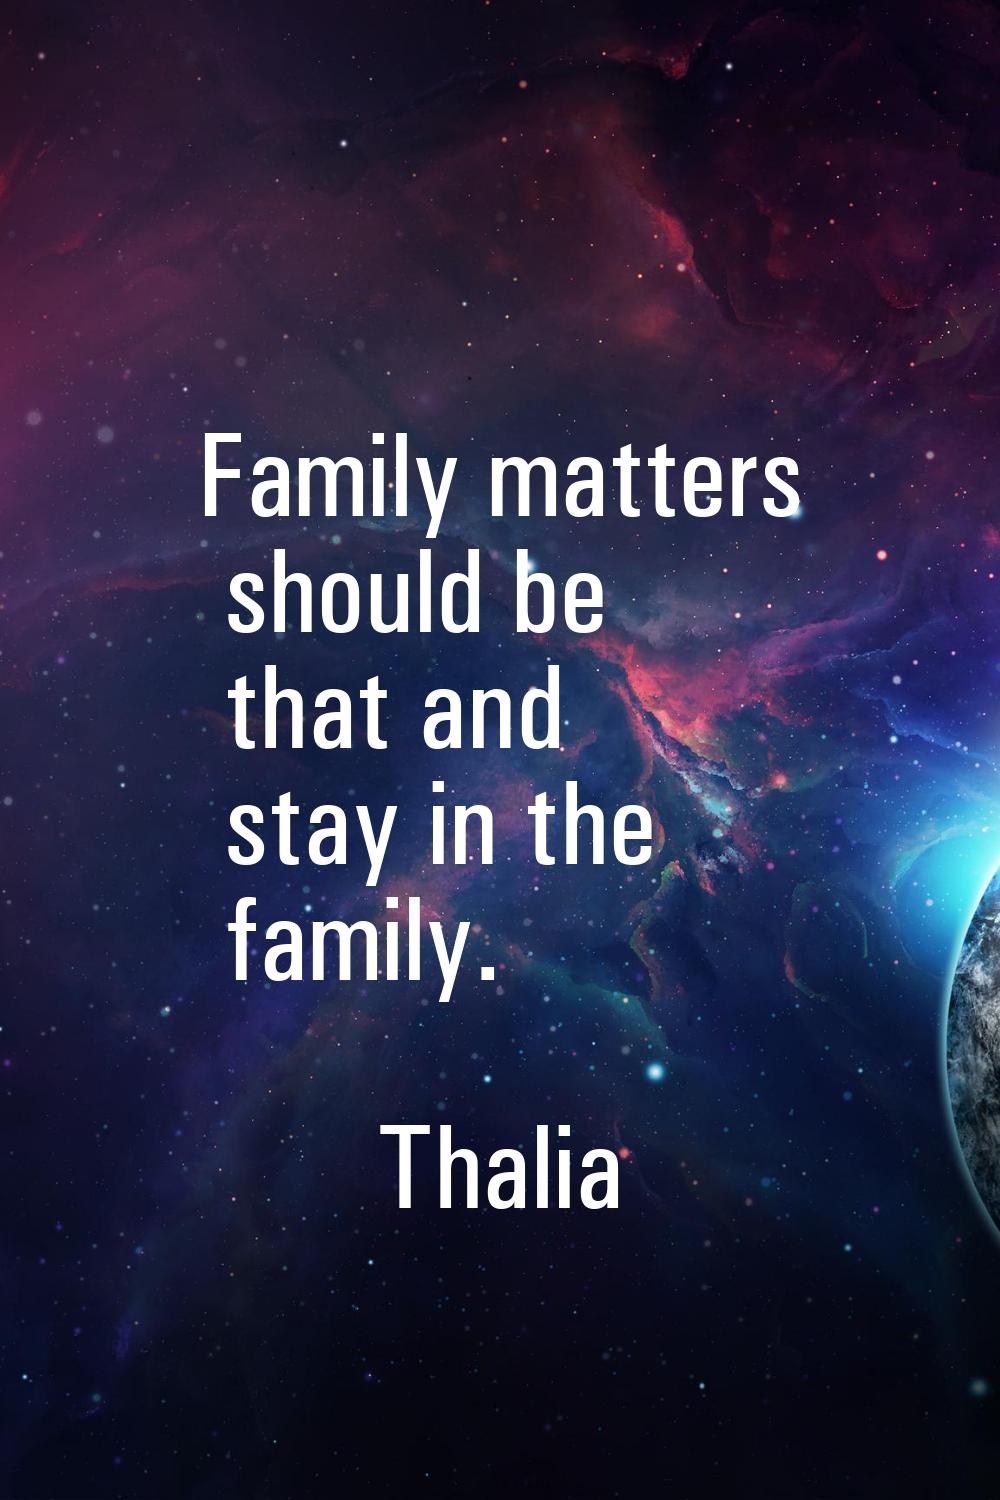 Family matters should be that and stay in the family.